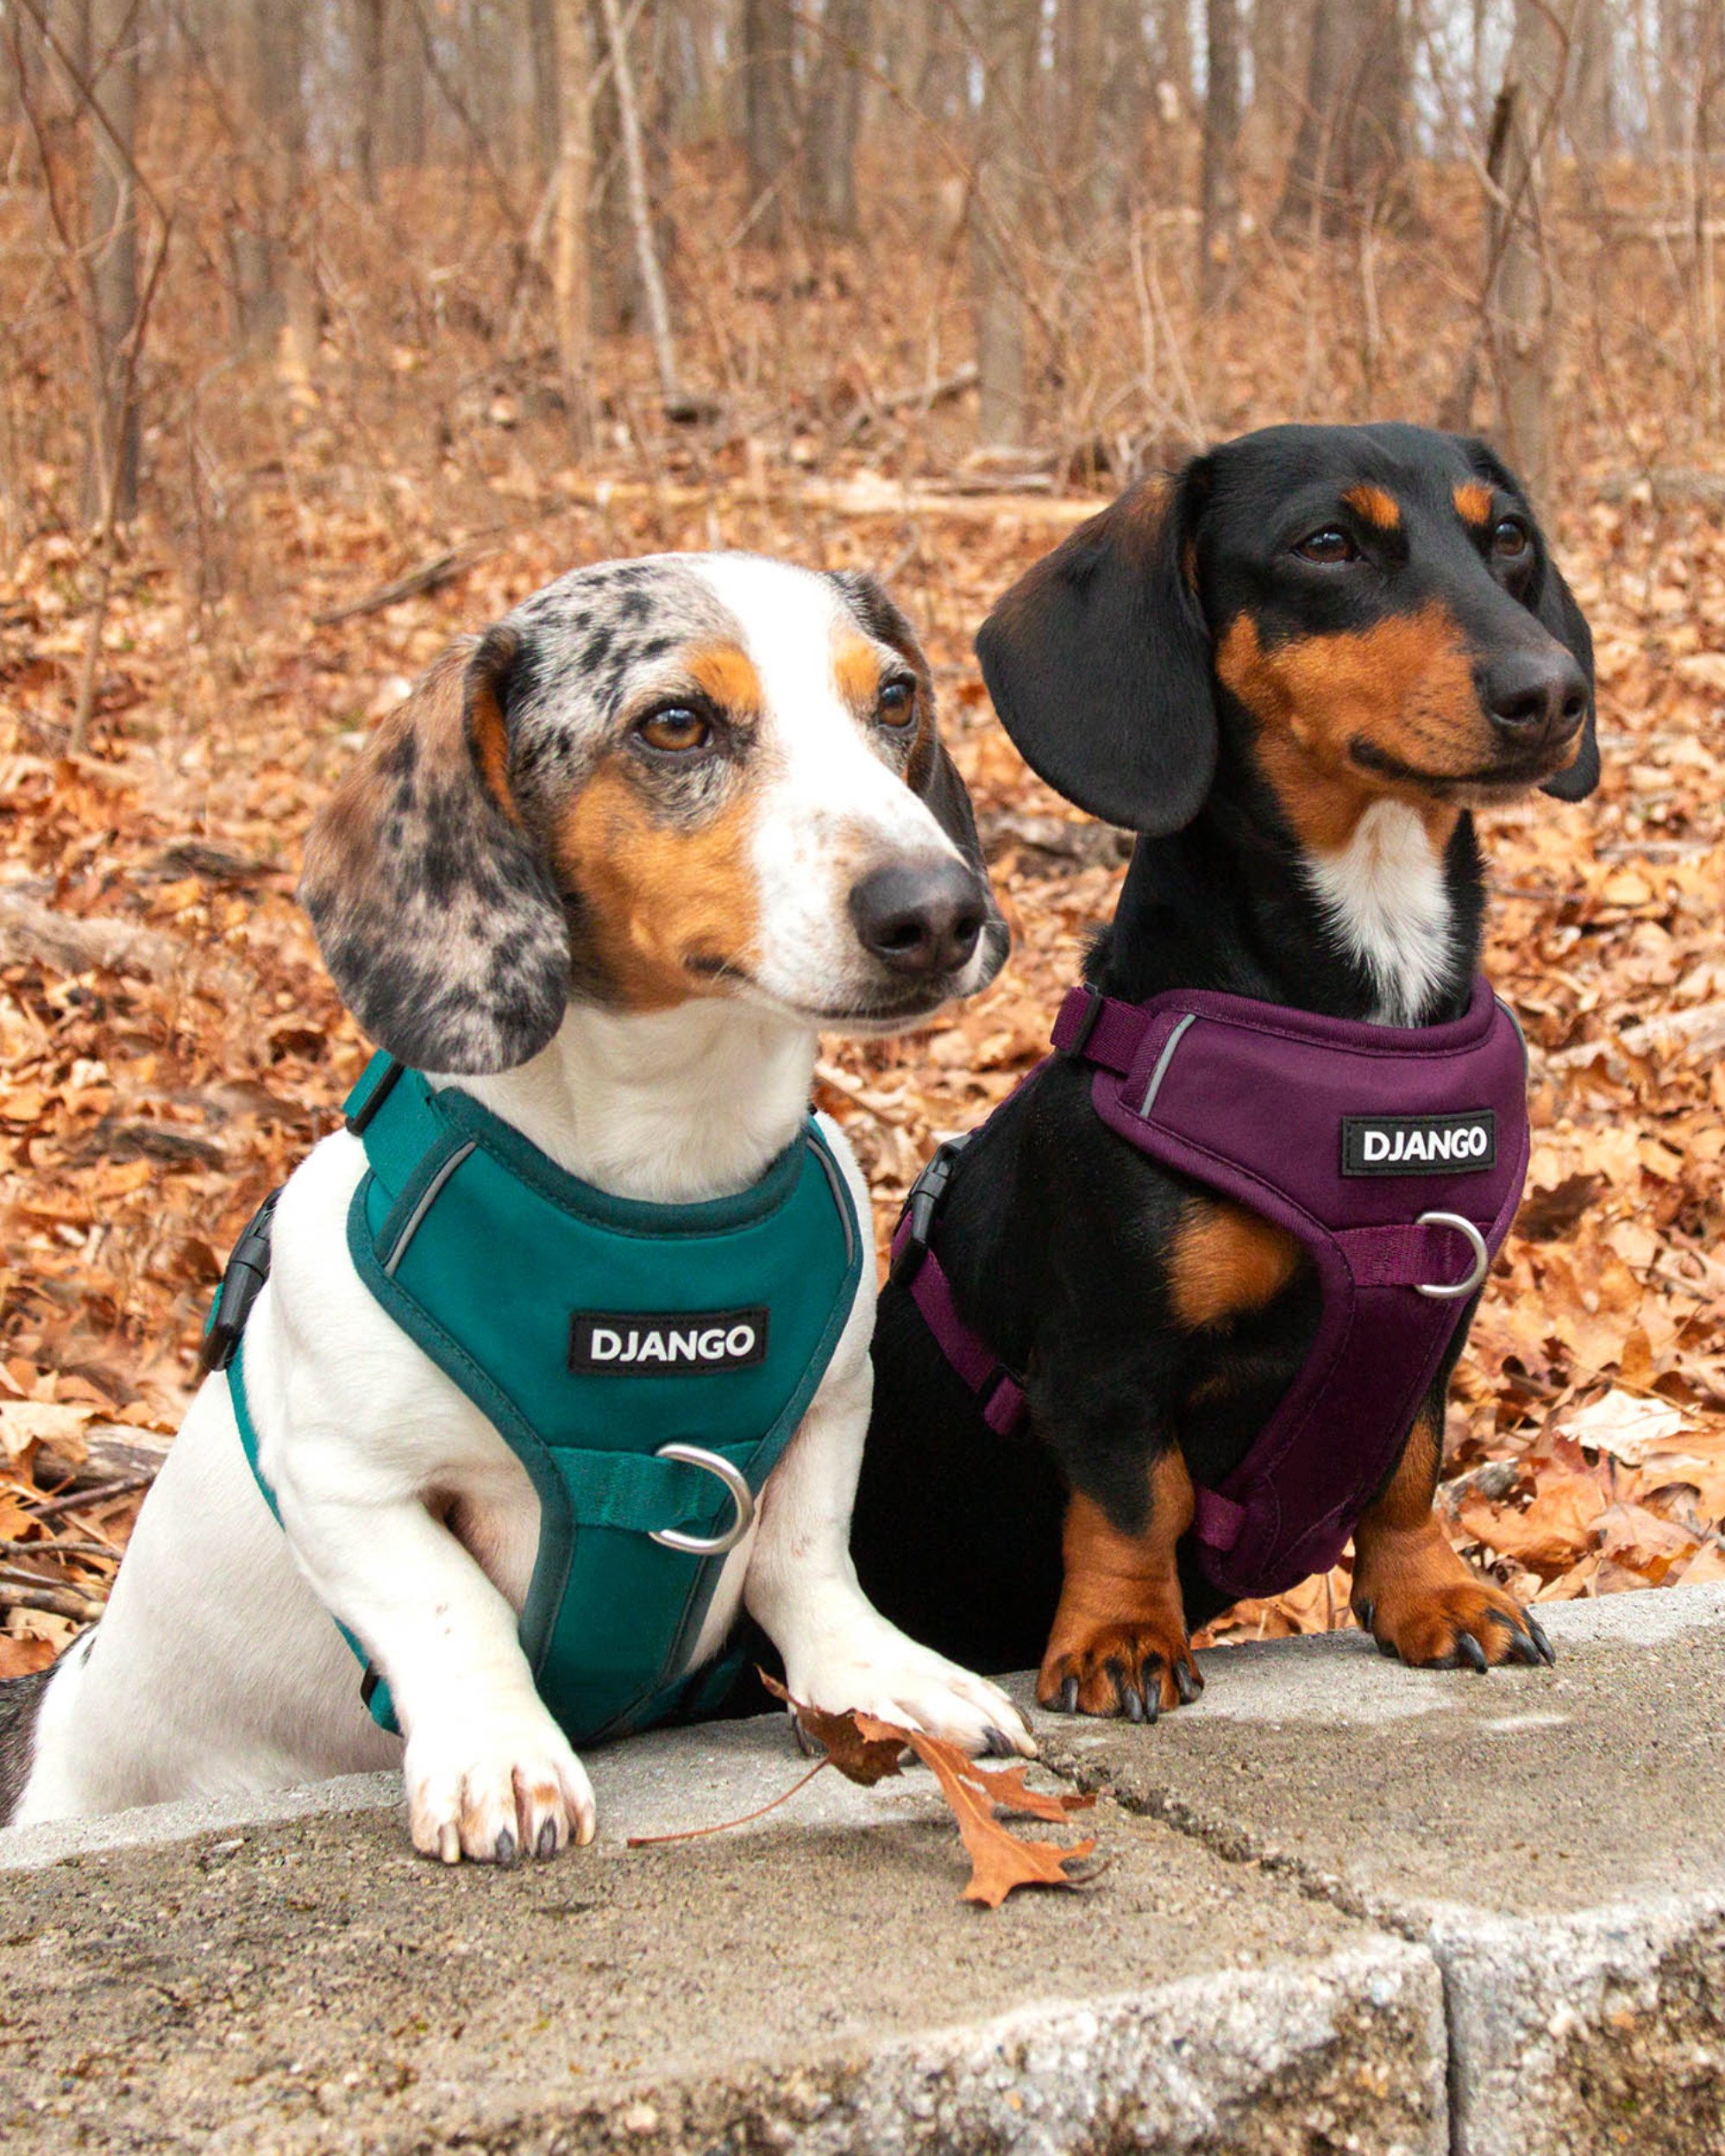 Twinning! Dachshunds Eko and Gretta are wearing matching DJANGO dog harnesses. DJANGO's Tahoe No Pull Dog Harness features a padded and lightweight harness body, adjustable chest and neck straps, and front and back D-rings for leash attachment - djangobrand.com